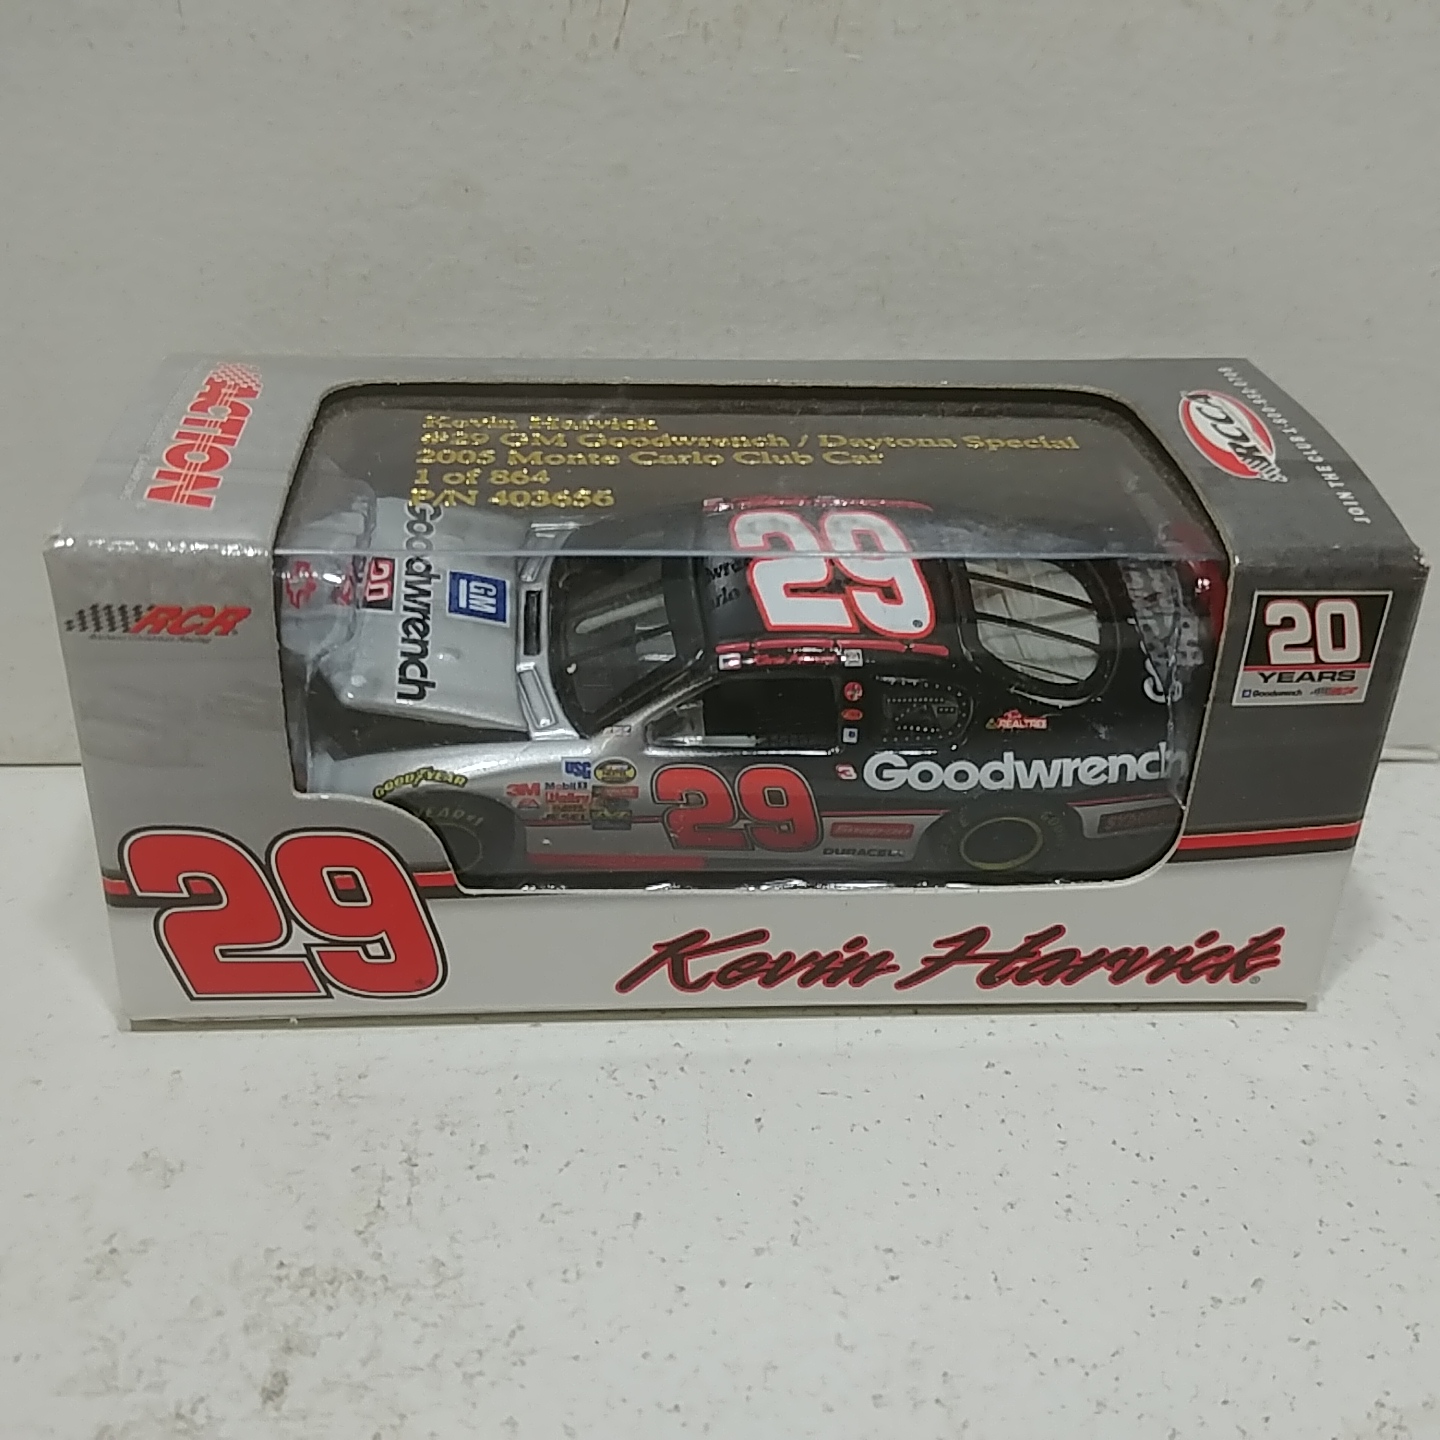 2005 Kevin Harvick 1/64th Goodwrench "Daytona Special" RCCA hood open Monte Carlo